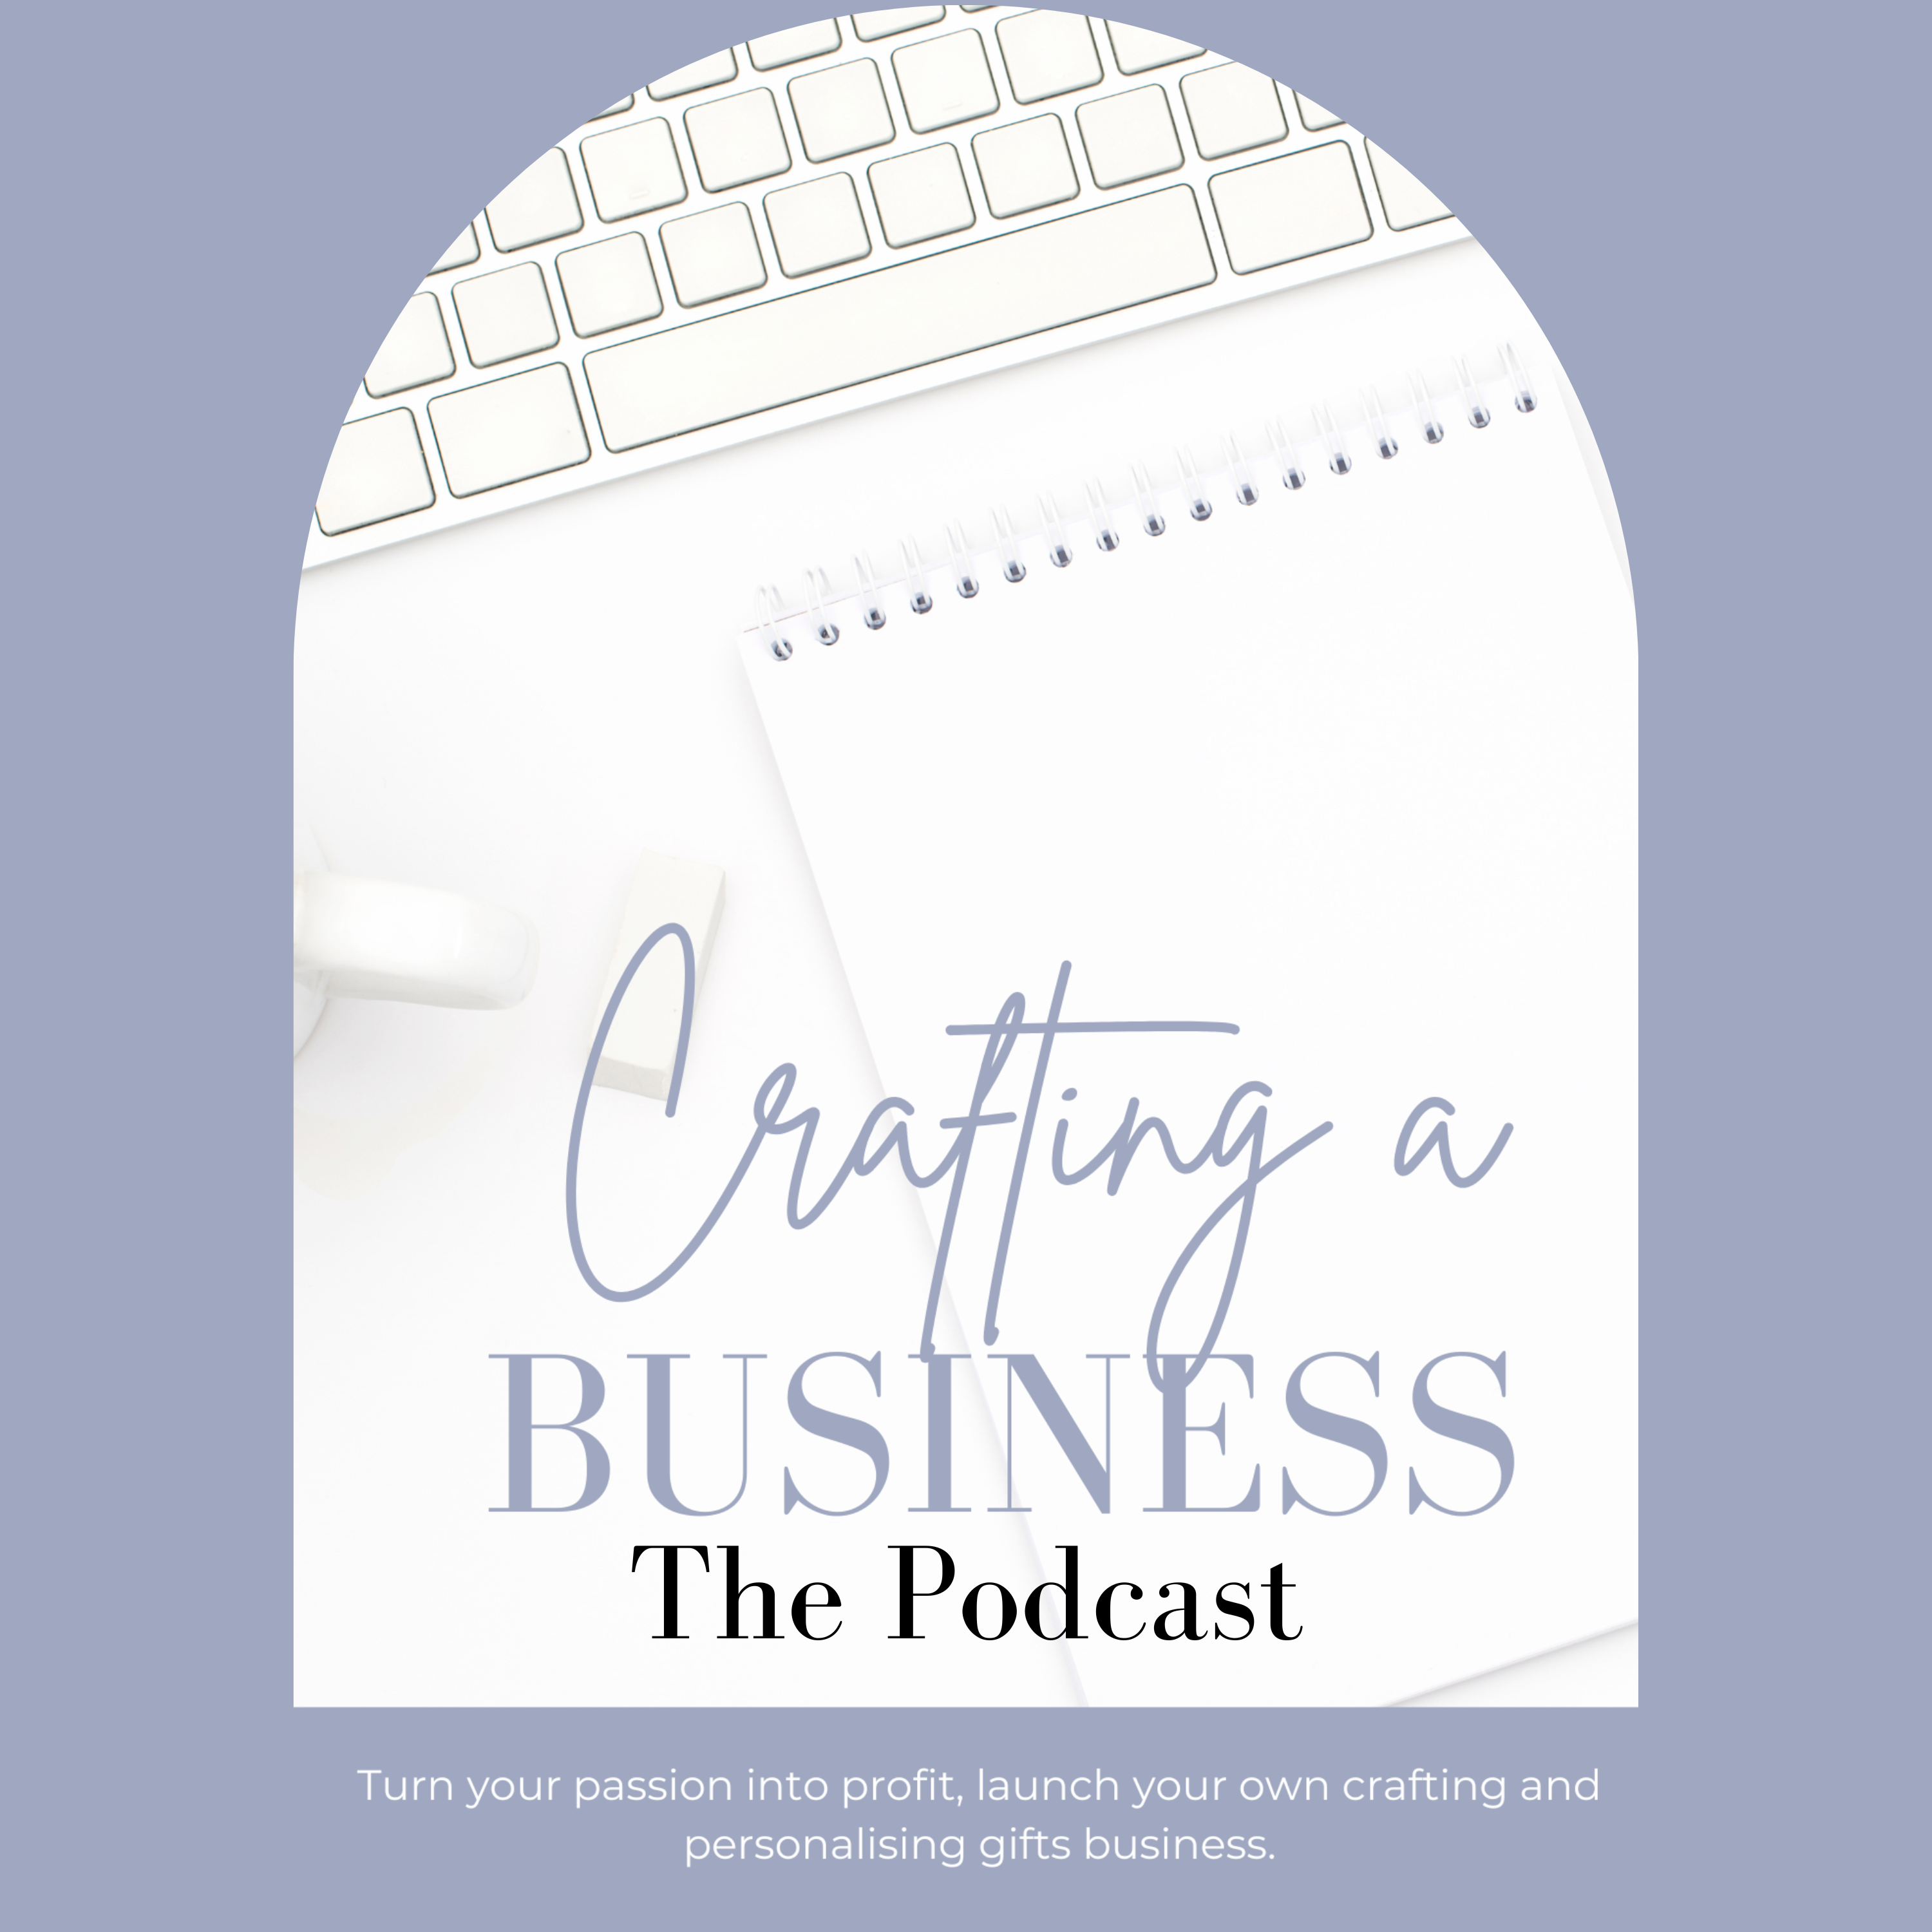 Our first podcast! E1: Crafting a Business by Only the Sweet Stuff